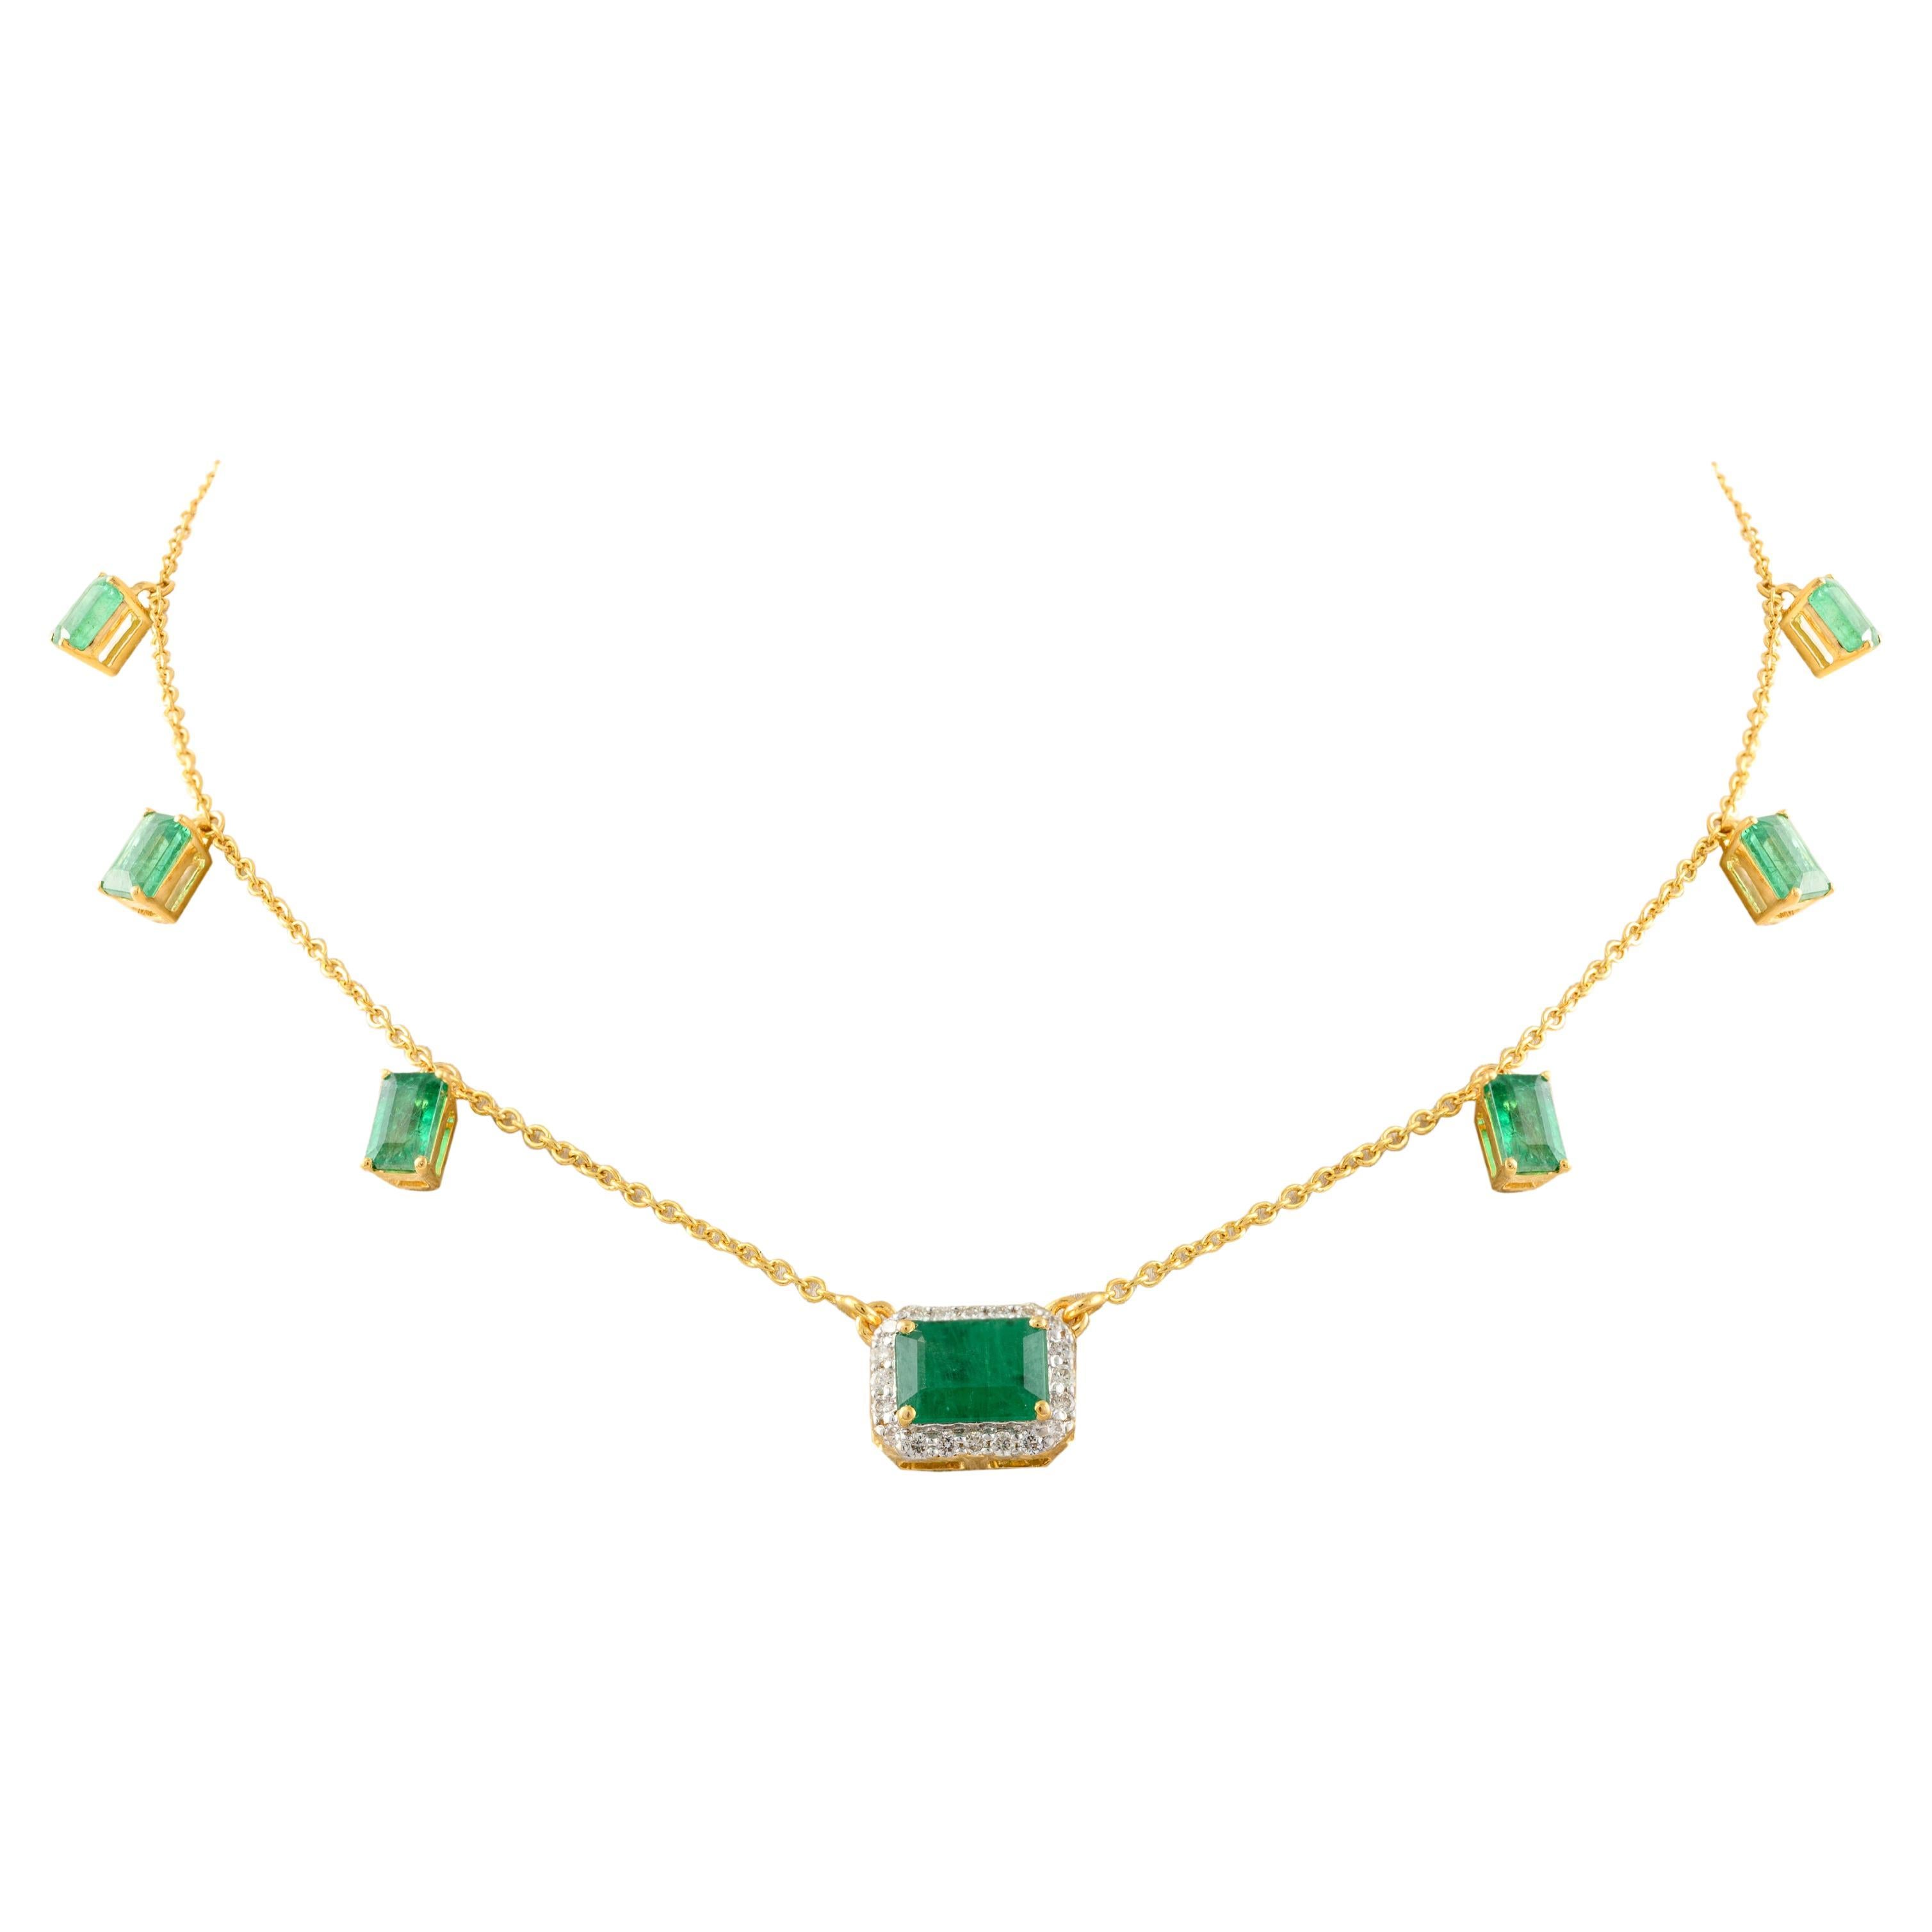 Emerald Charm Necklace 14k Yellow Gold, Emerald Fine Jewelry Gift For Women For Sale